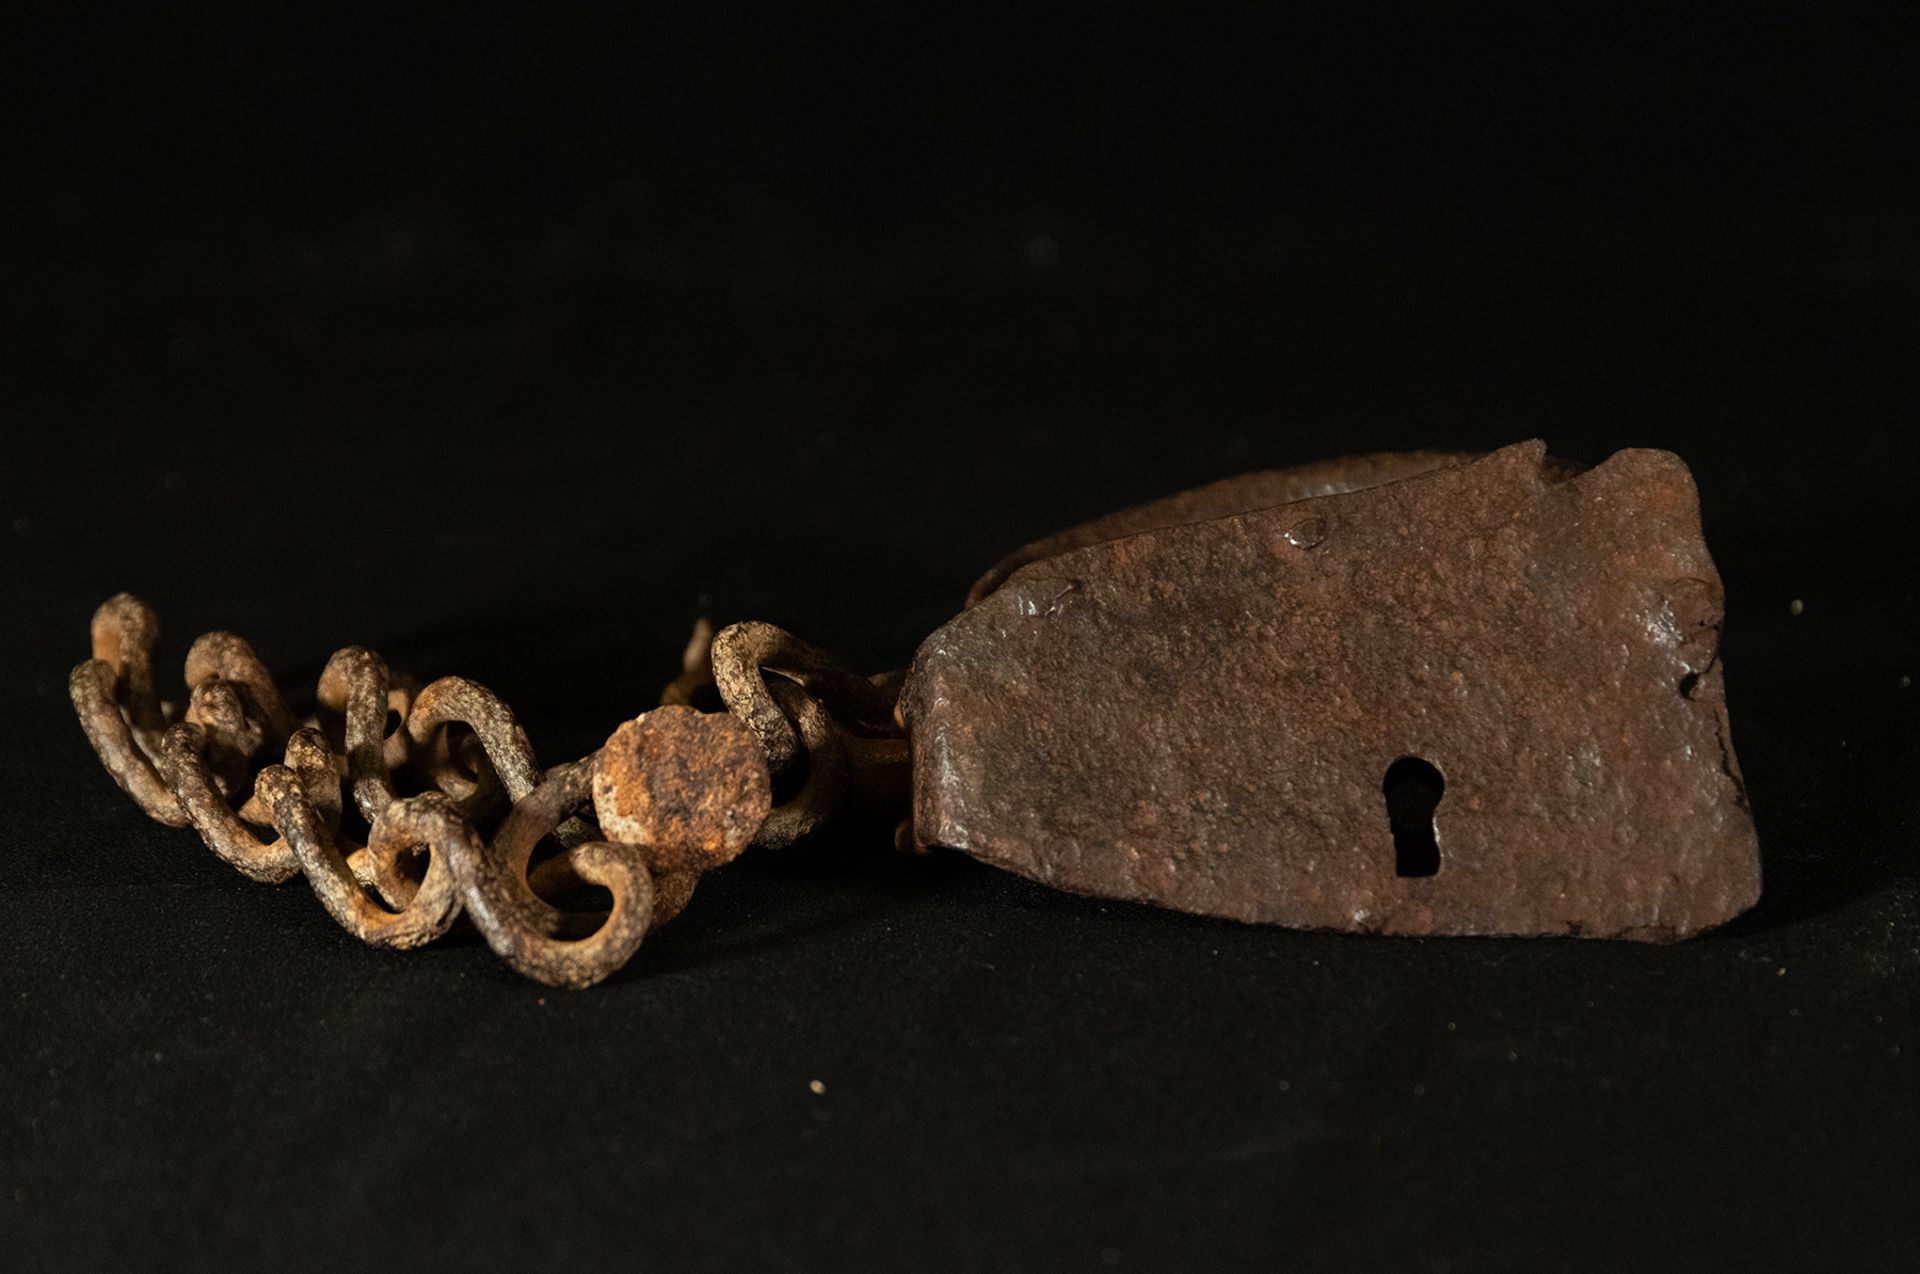 Rare Rack for slave or prisoner condemned to row on ships with nail. 17th century - Image 3 of 3